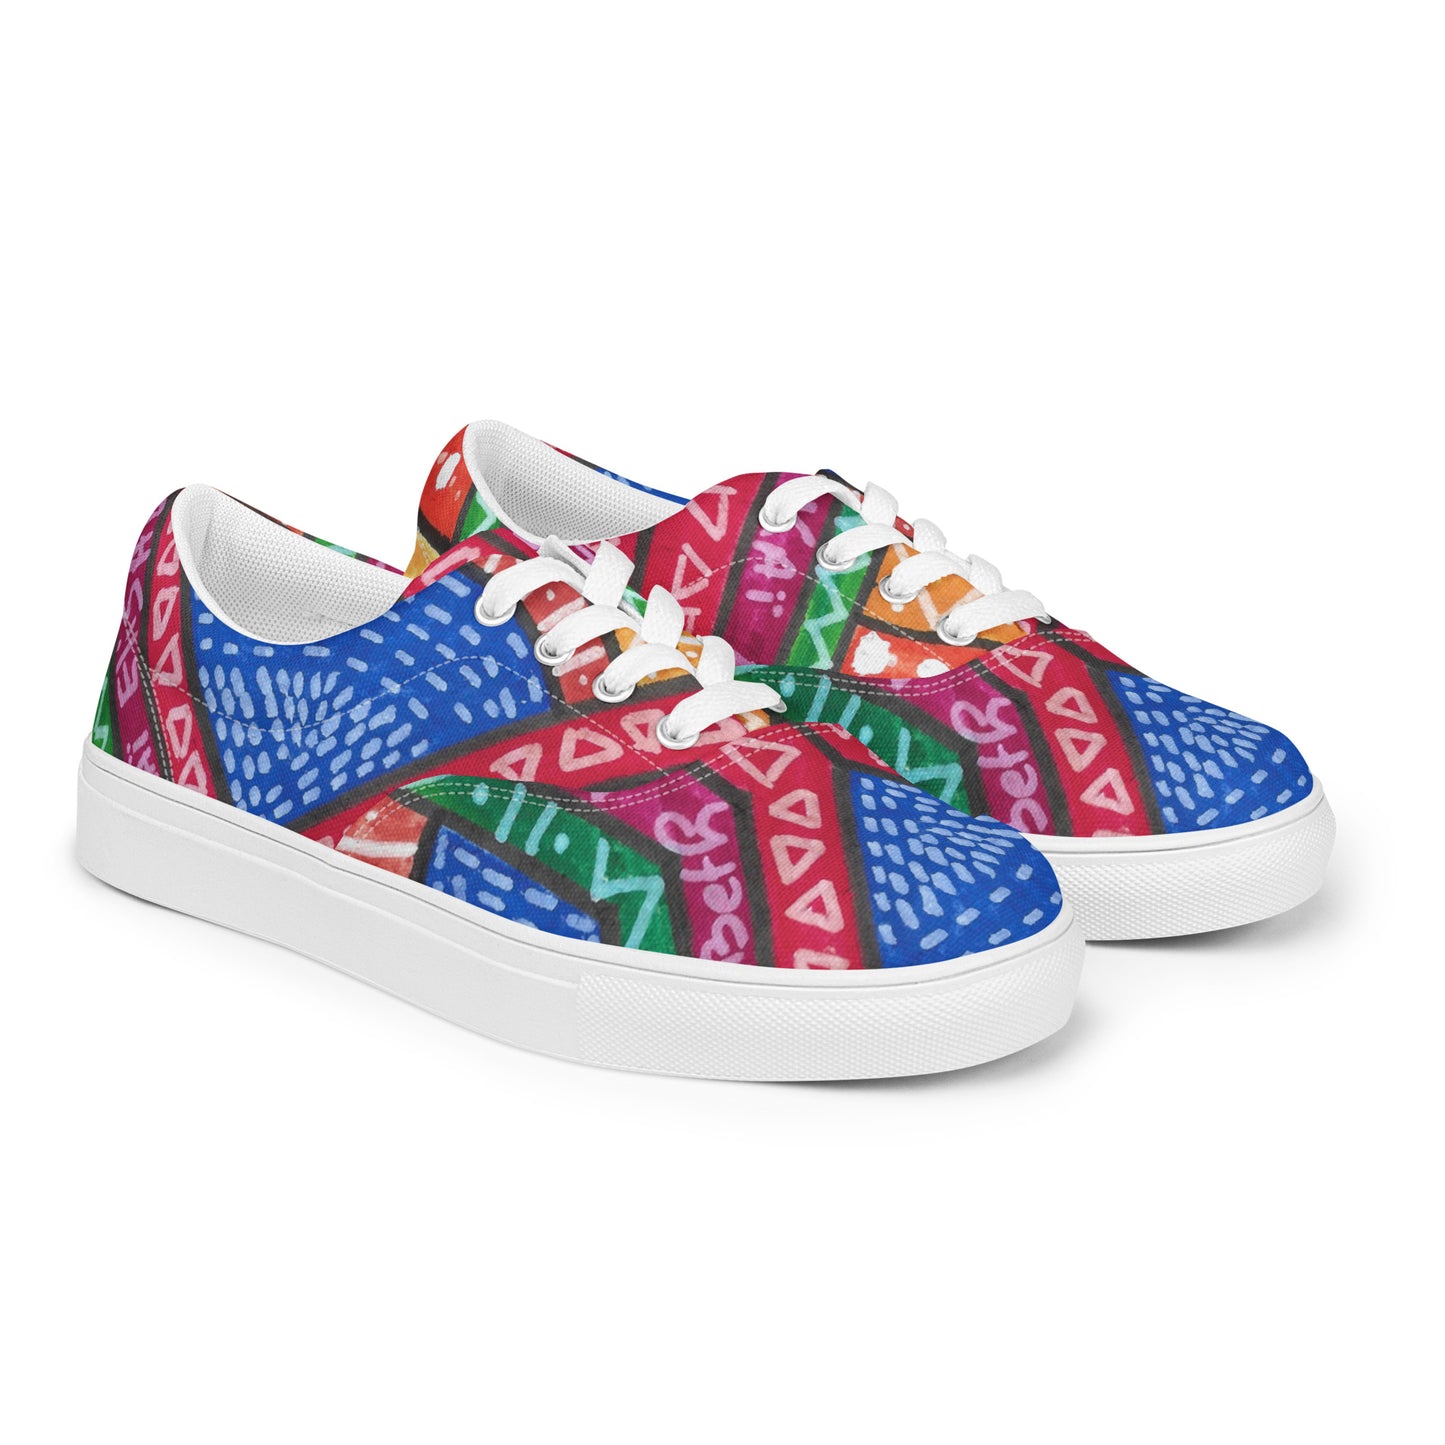 TIYI - Women's canvas trainers with laces